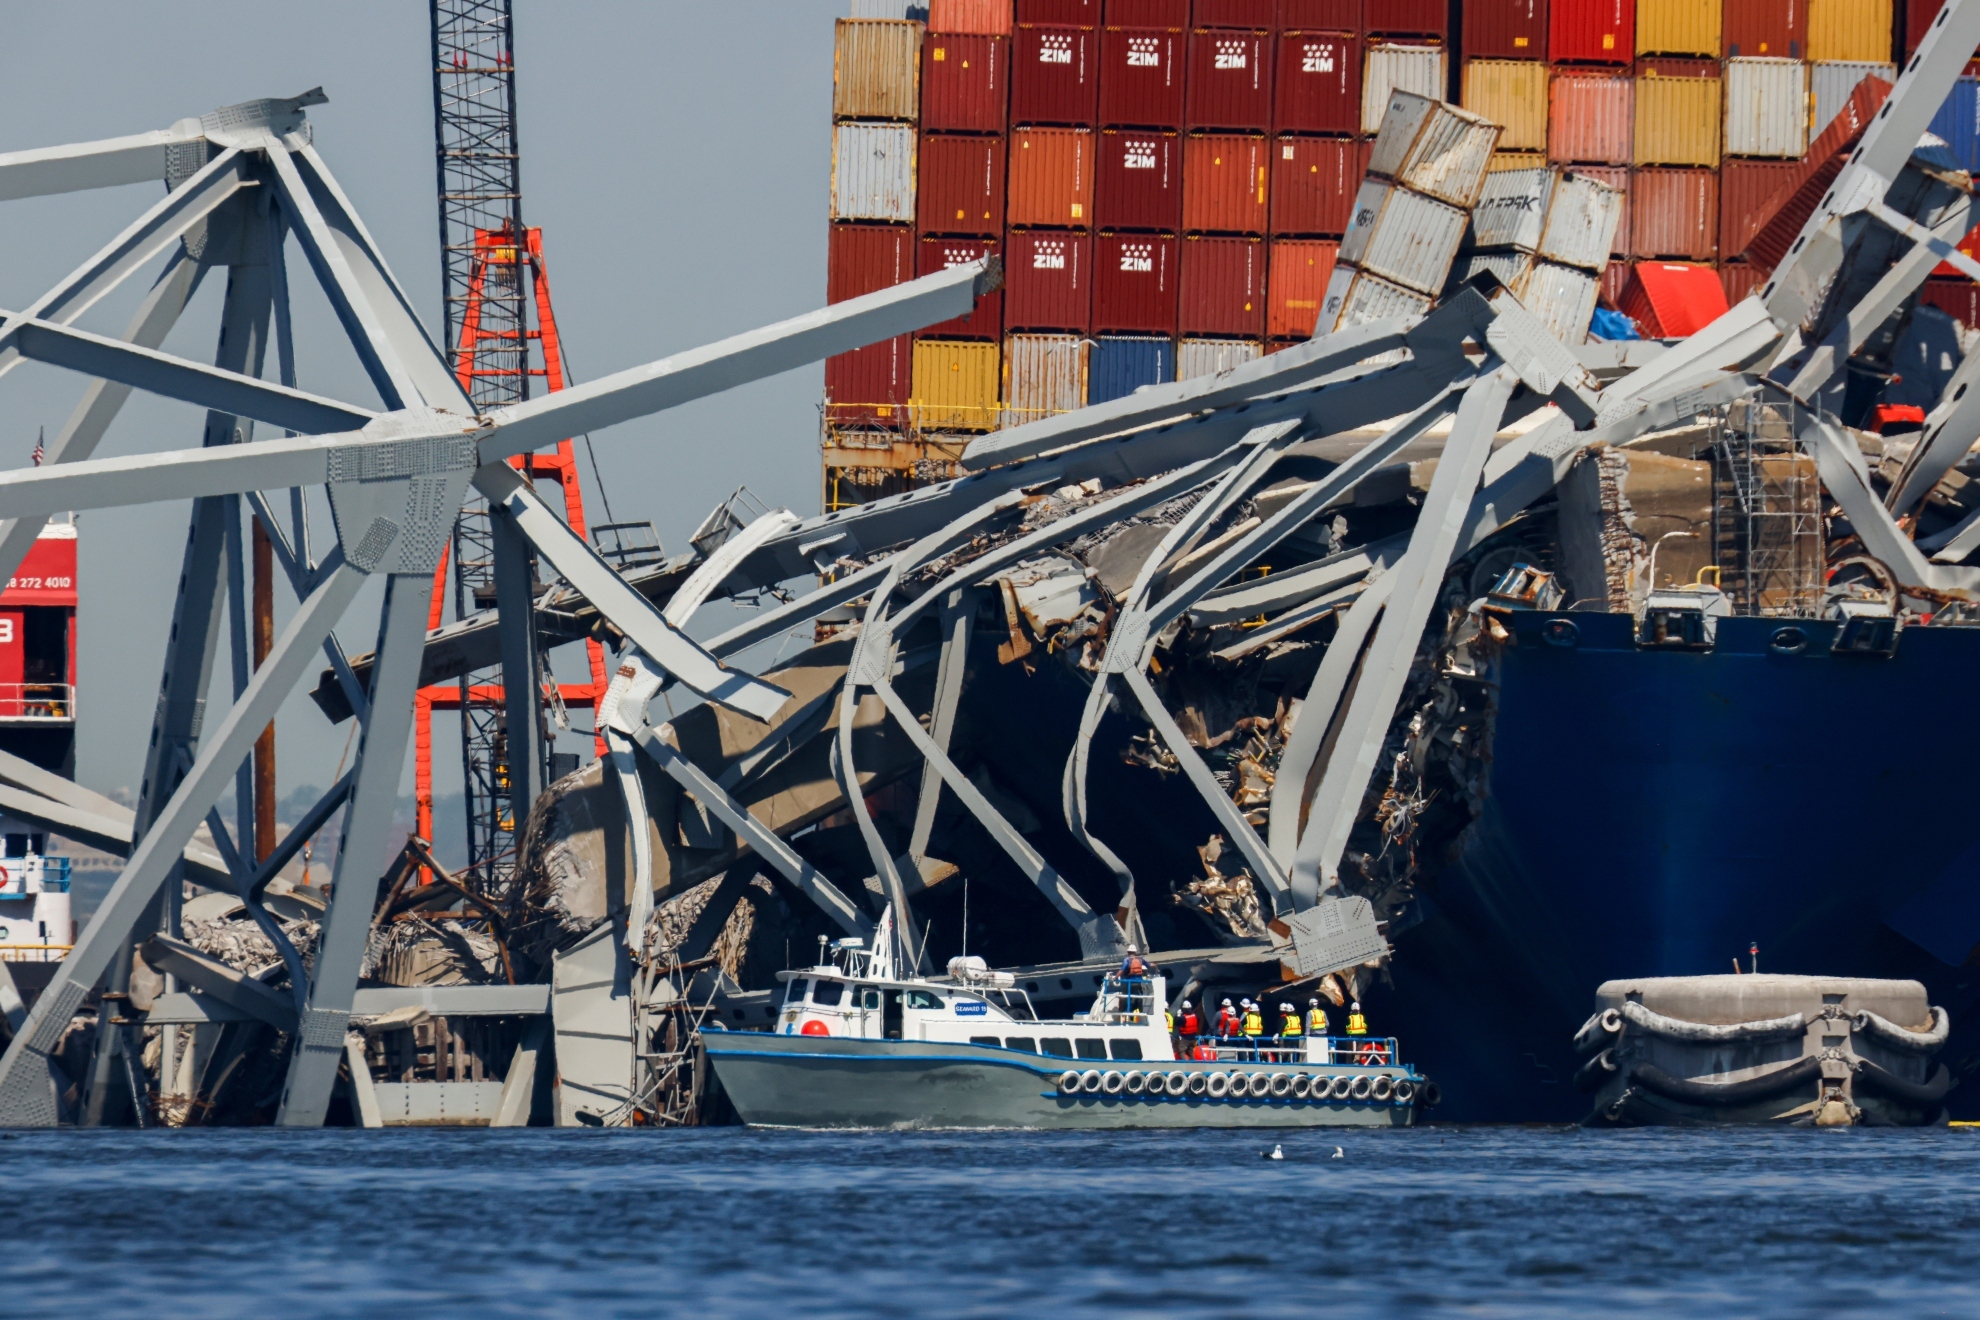 Fourth dead body found in submerged vehicle at Key Bridge collapse